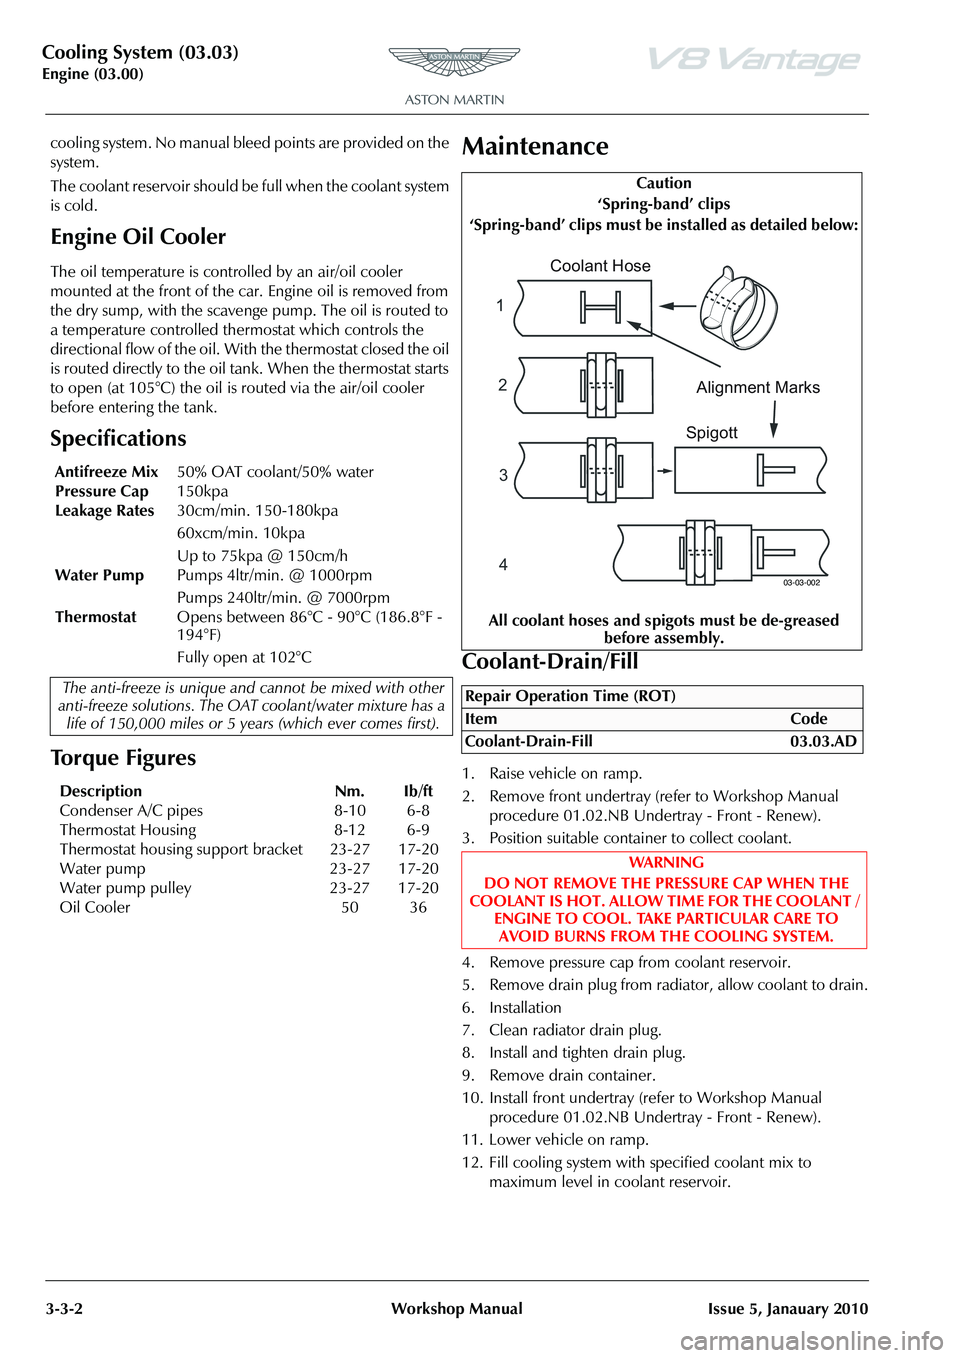 ASTON MARTIN V8 VANTAGE 2010  Workshop Manual Cooling System (03.03)
Engine (03.00)3-3-2 Workshop Manual Issue 5, Janauary 2010
cooling system. No manual bleed points are provided on the 
system.
The coolant reservoir should be full when the cool